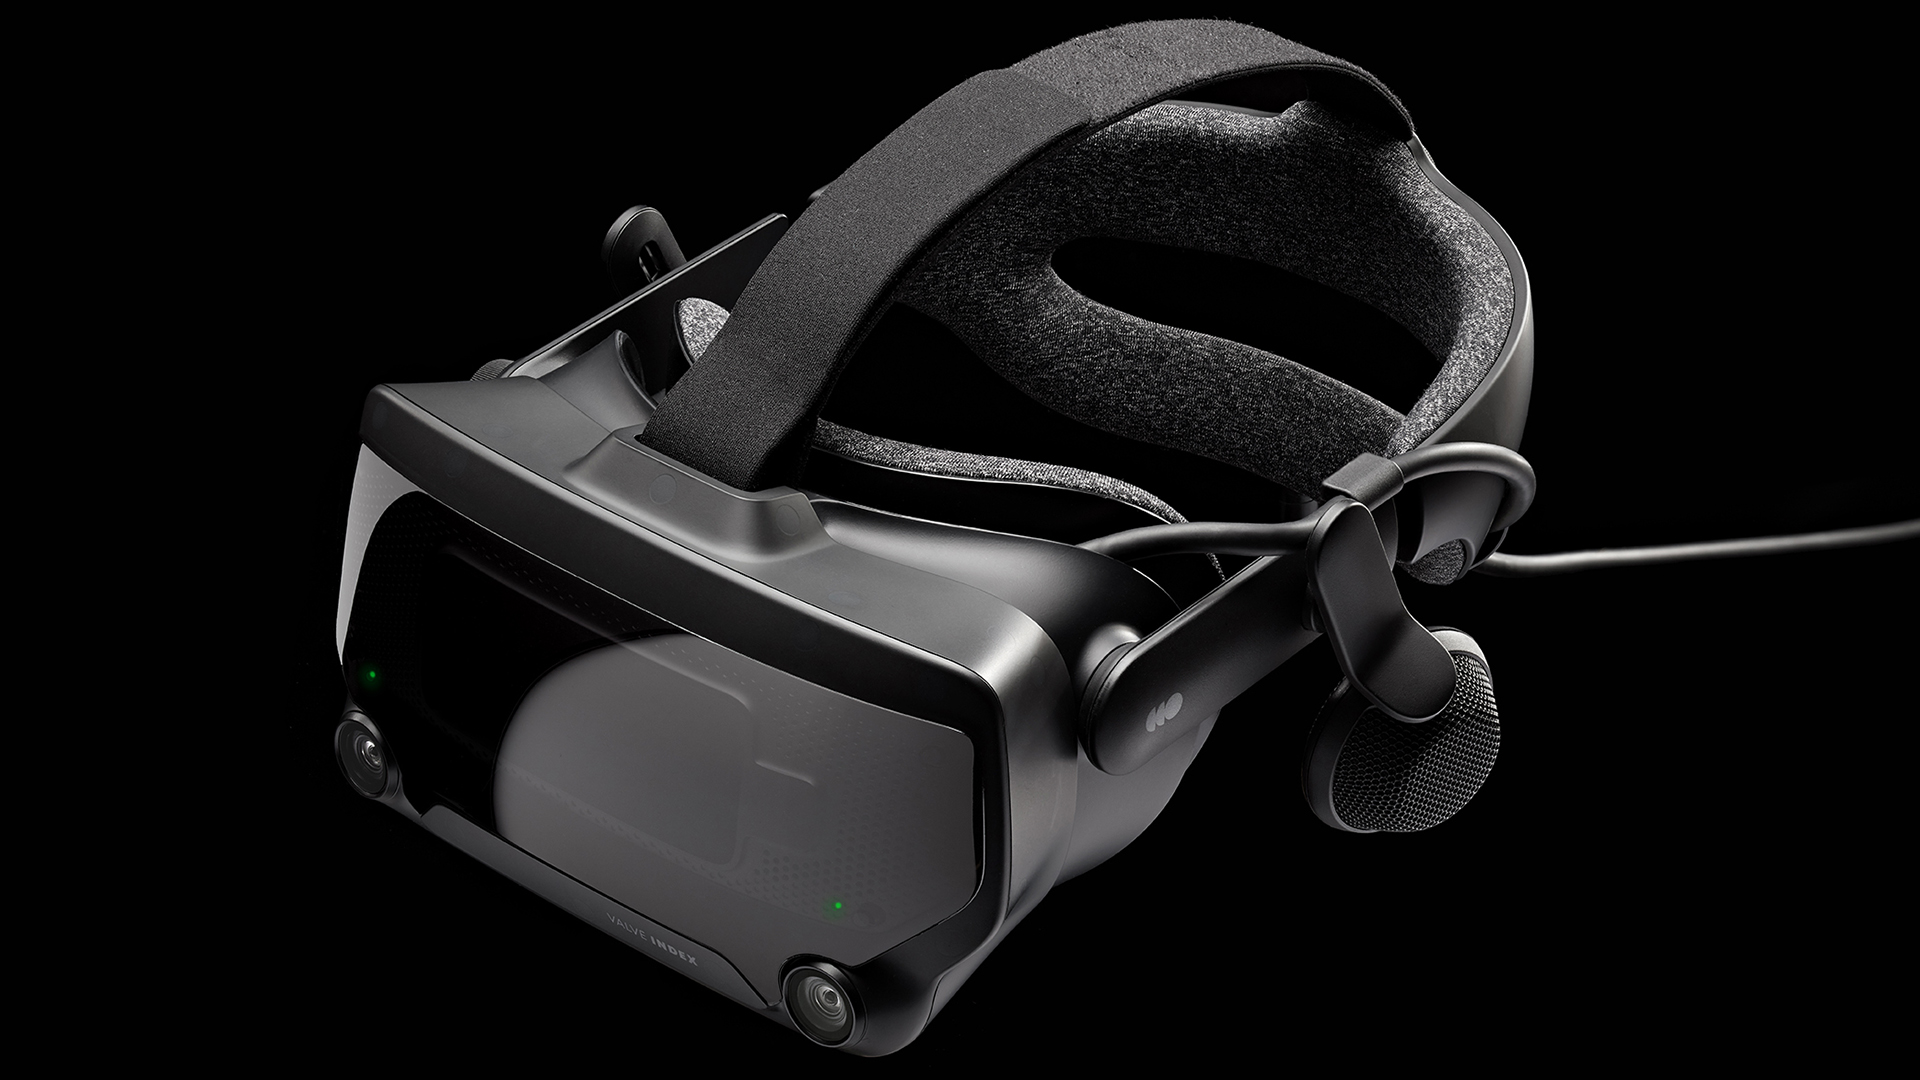 A photo of the Valve index VR headset